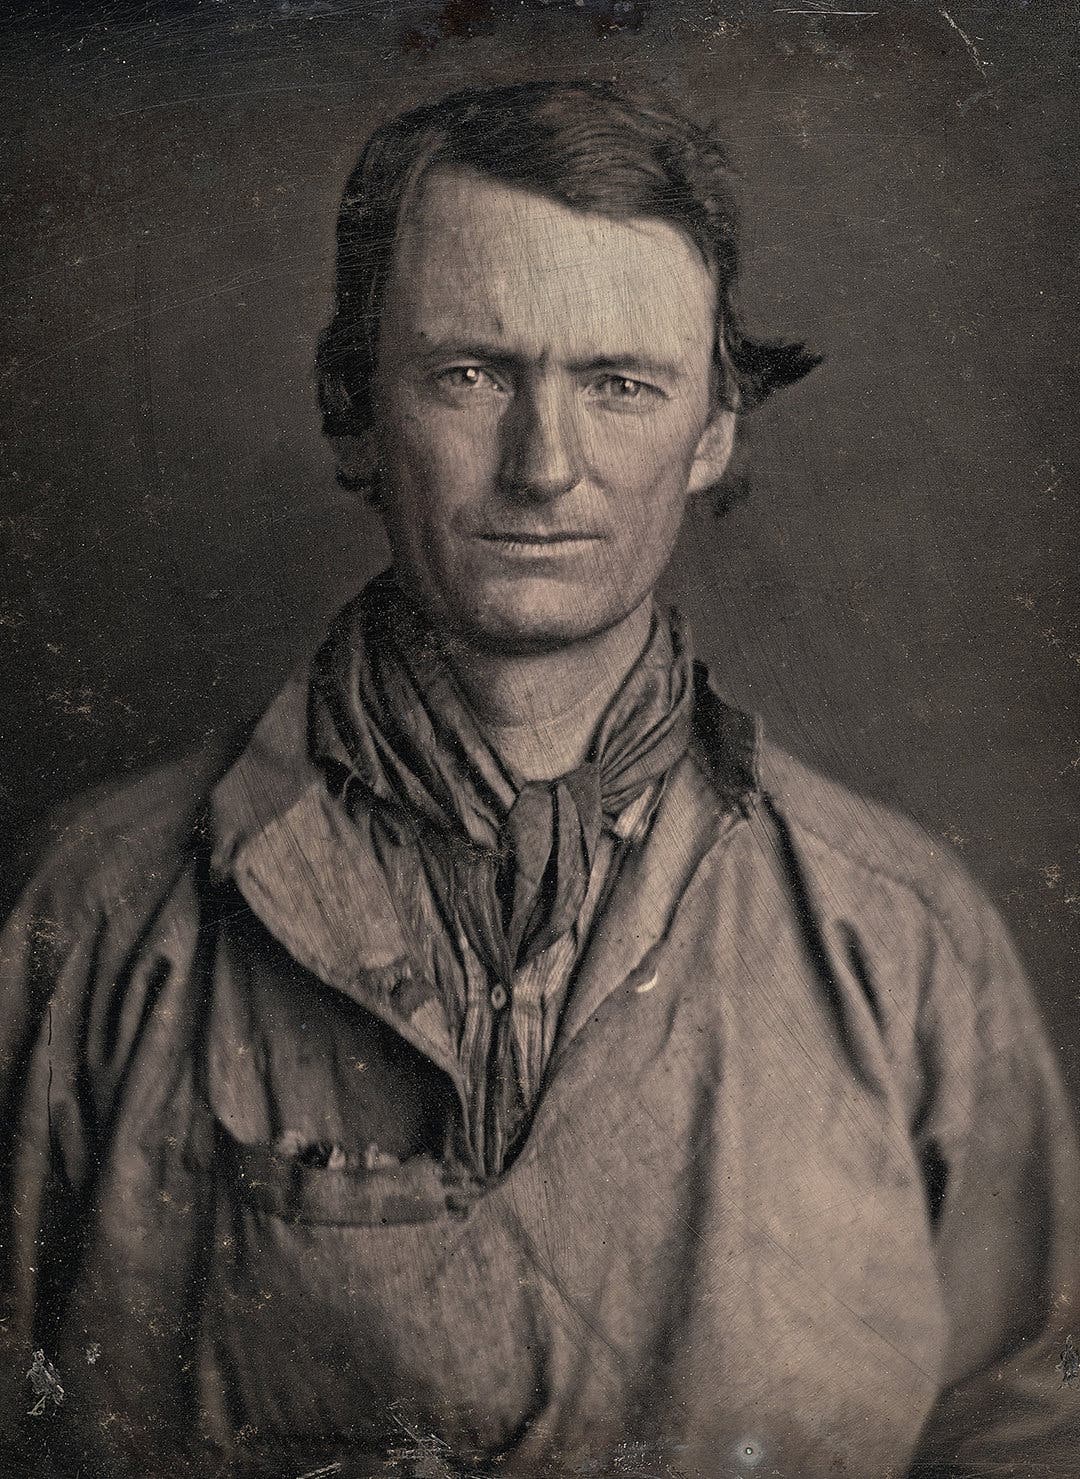 Unidentified man circa 1850, by Robert H Vance. © Canadian Photography Institute